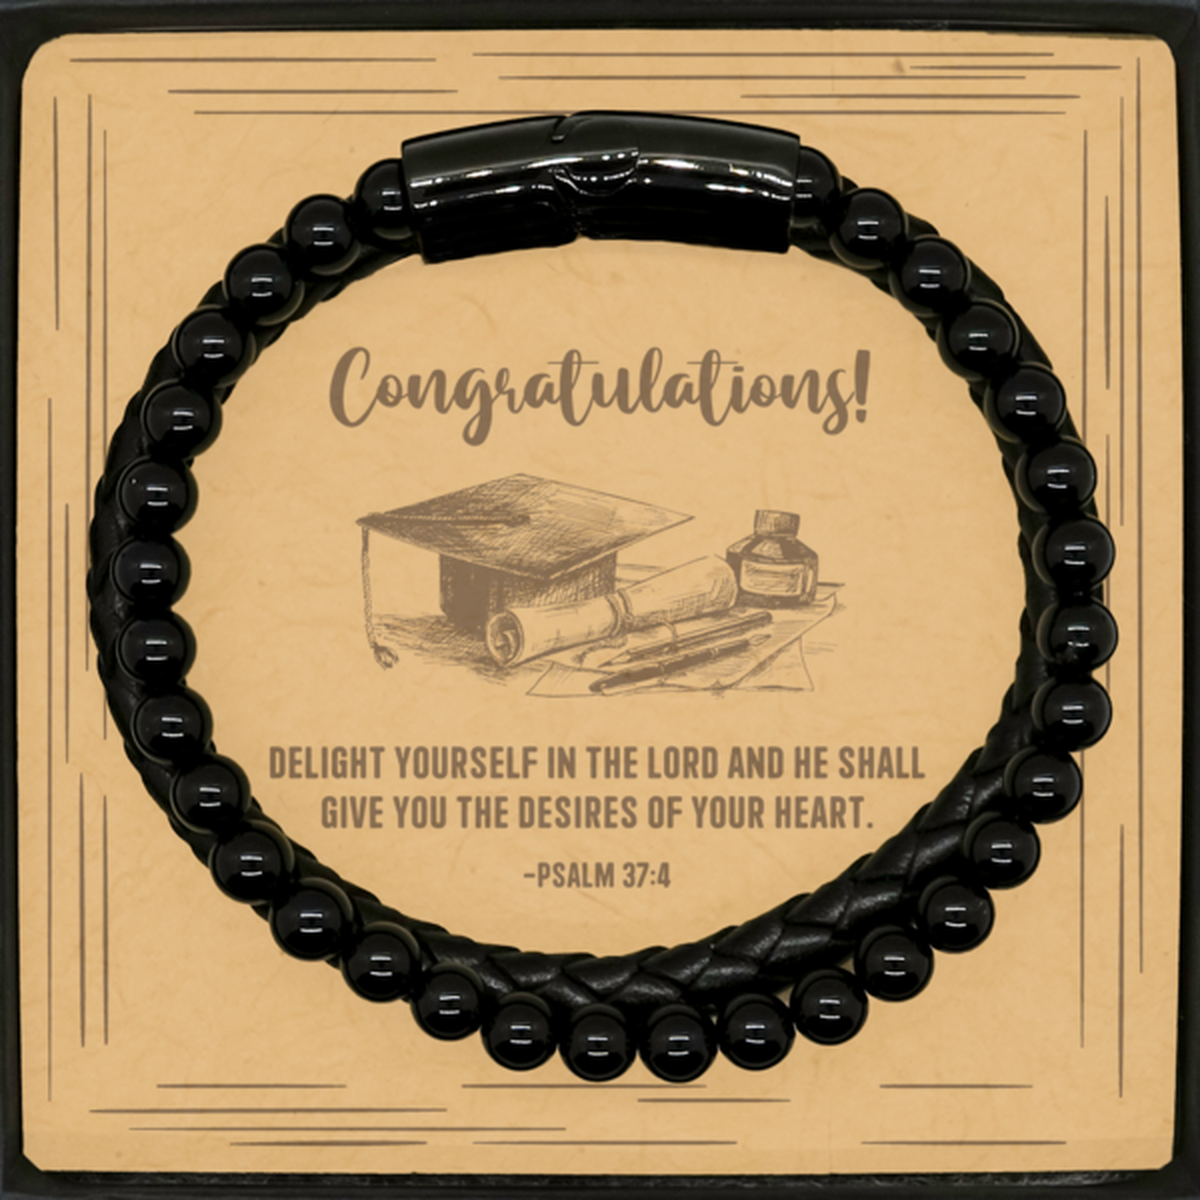 Religious Graduation Cards, Delight yourself in the Lord, Bible Verse Stone Leather Bracelet, Christian Graduation Gifts